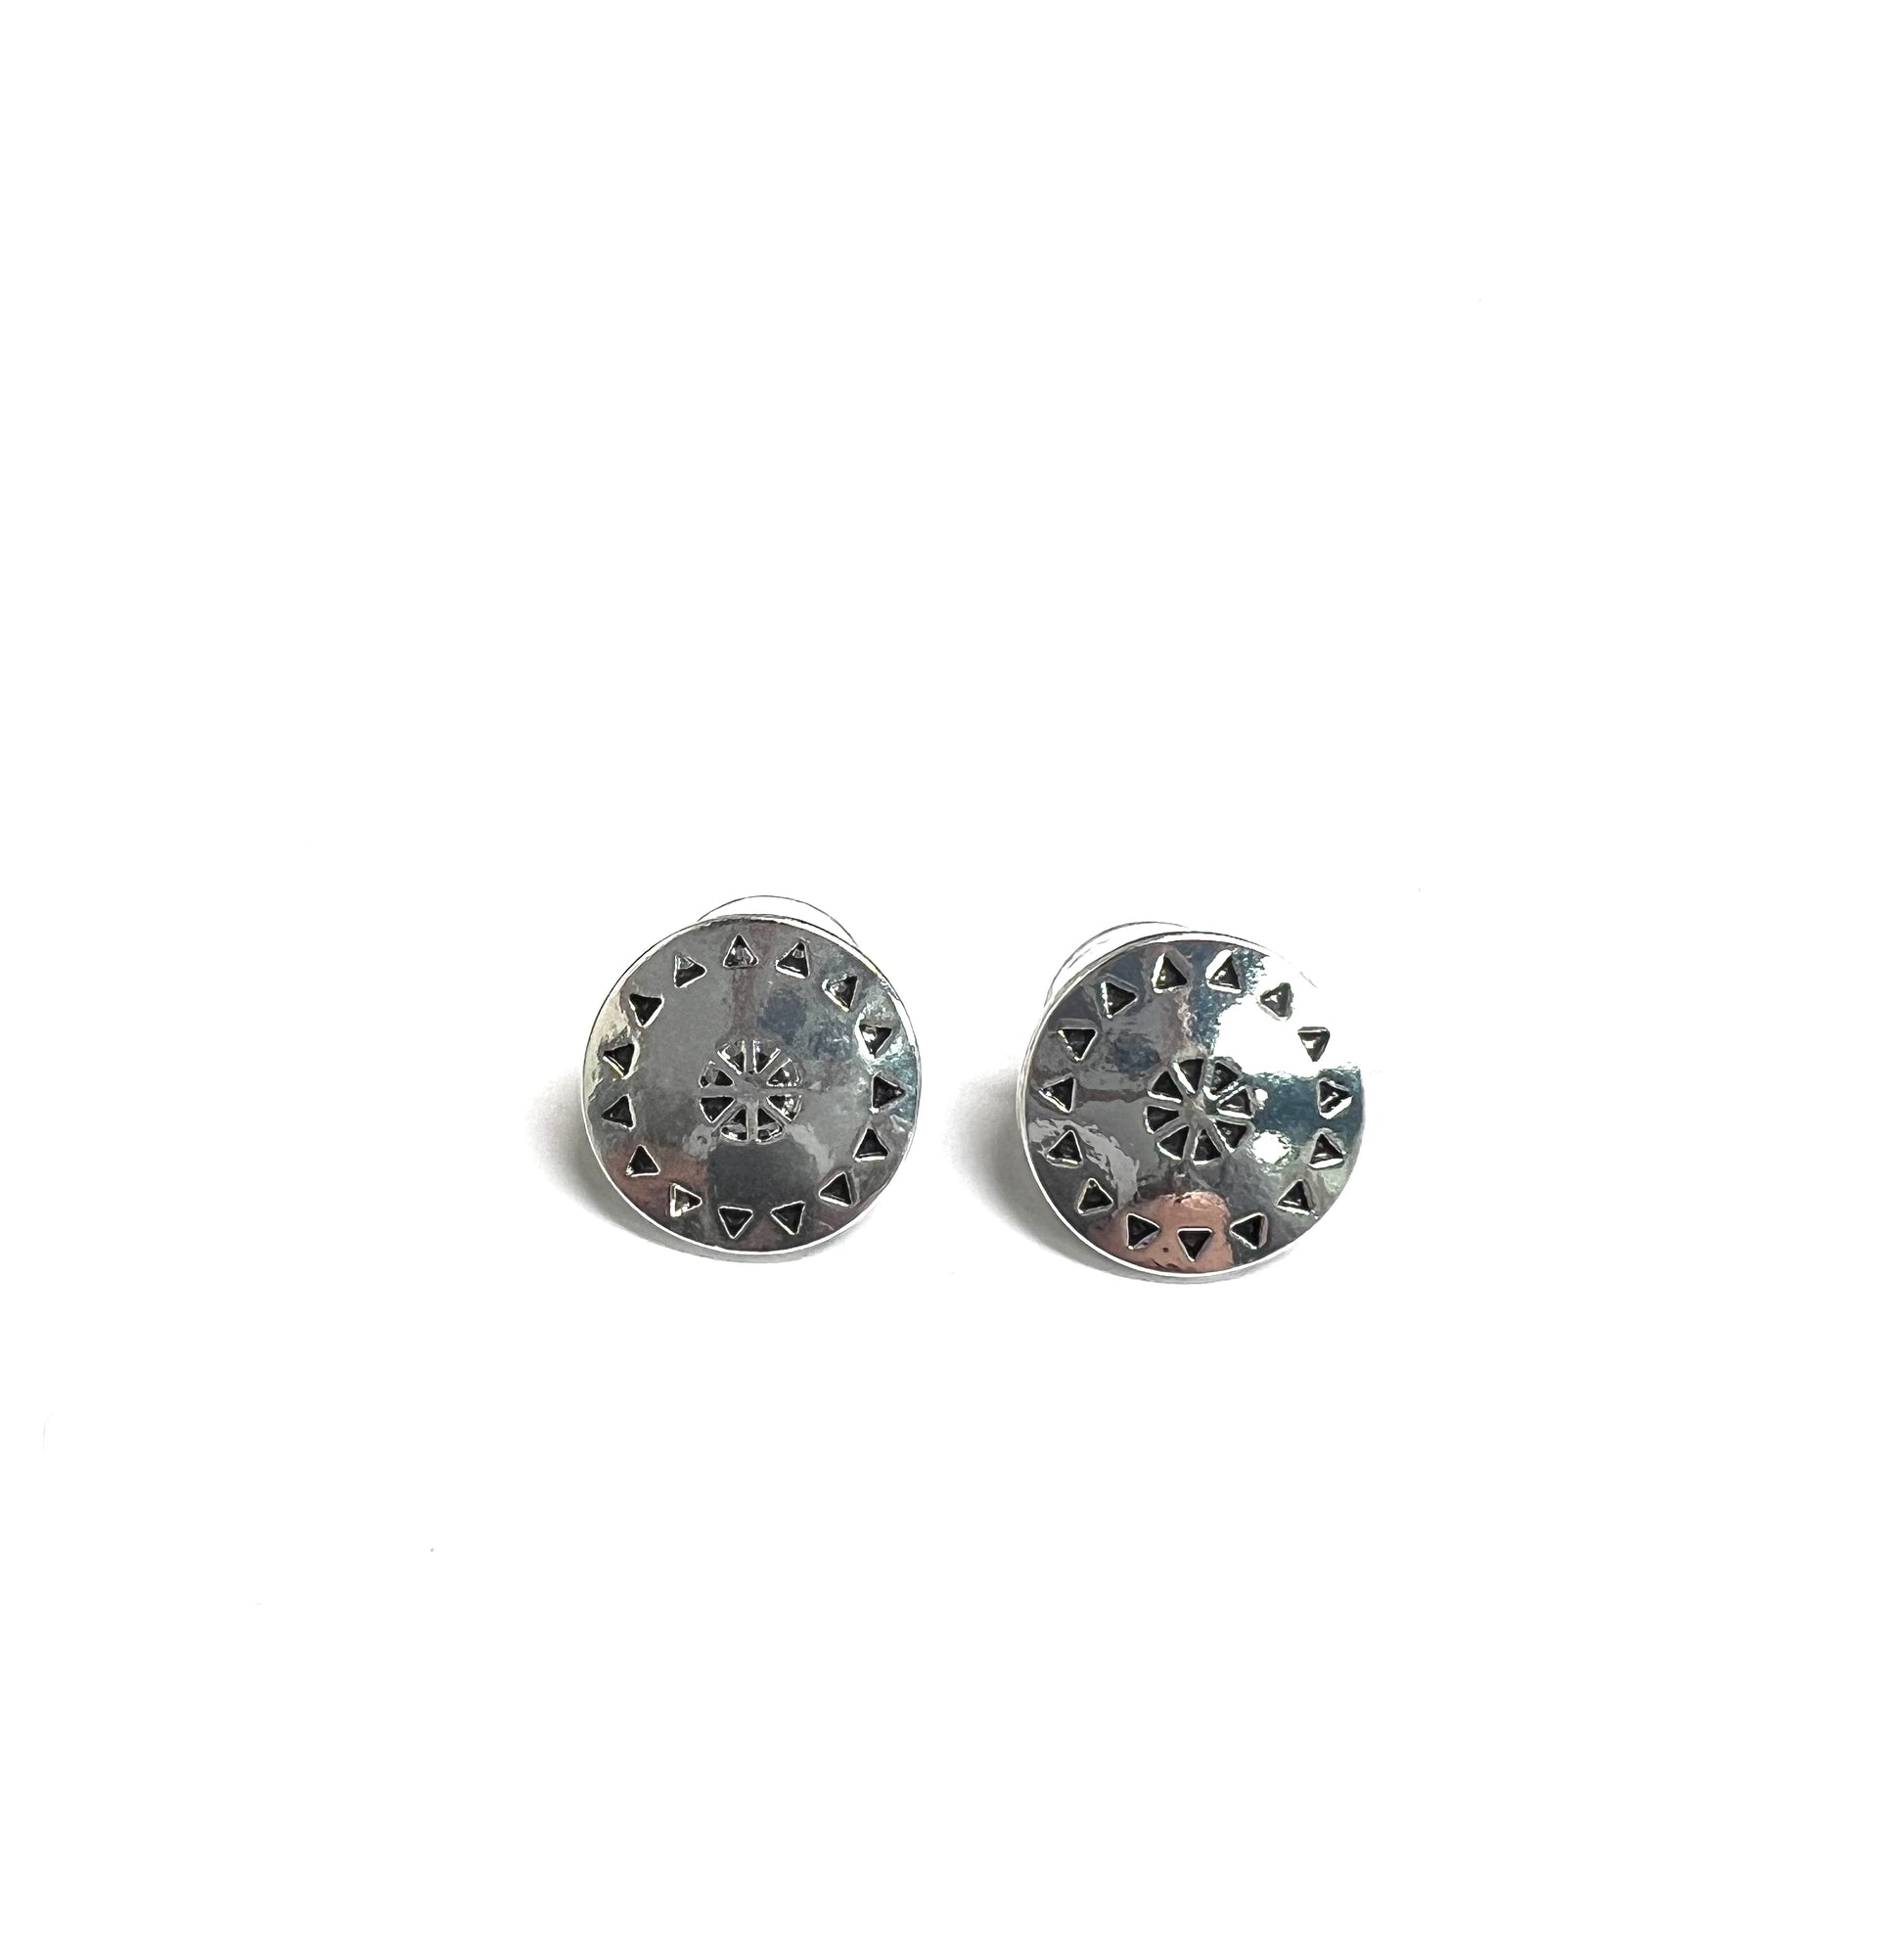 West and Co. Small Silver Round Stud Earrings-Stud Earrings-West and Co.--The Twisted Chandelier